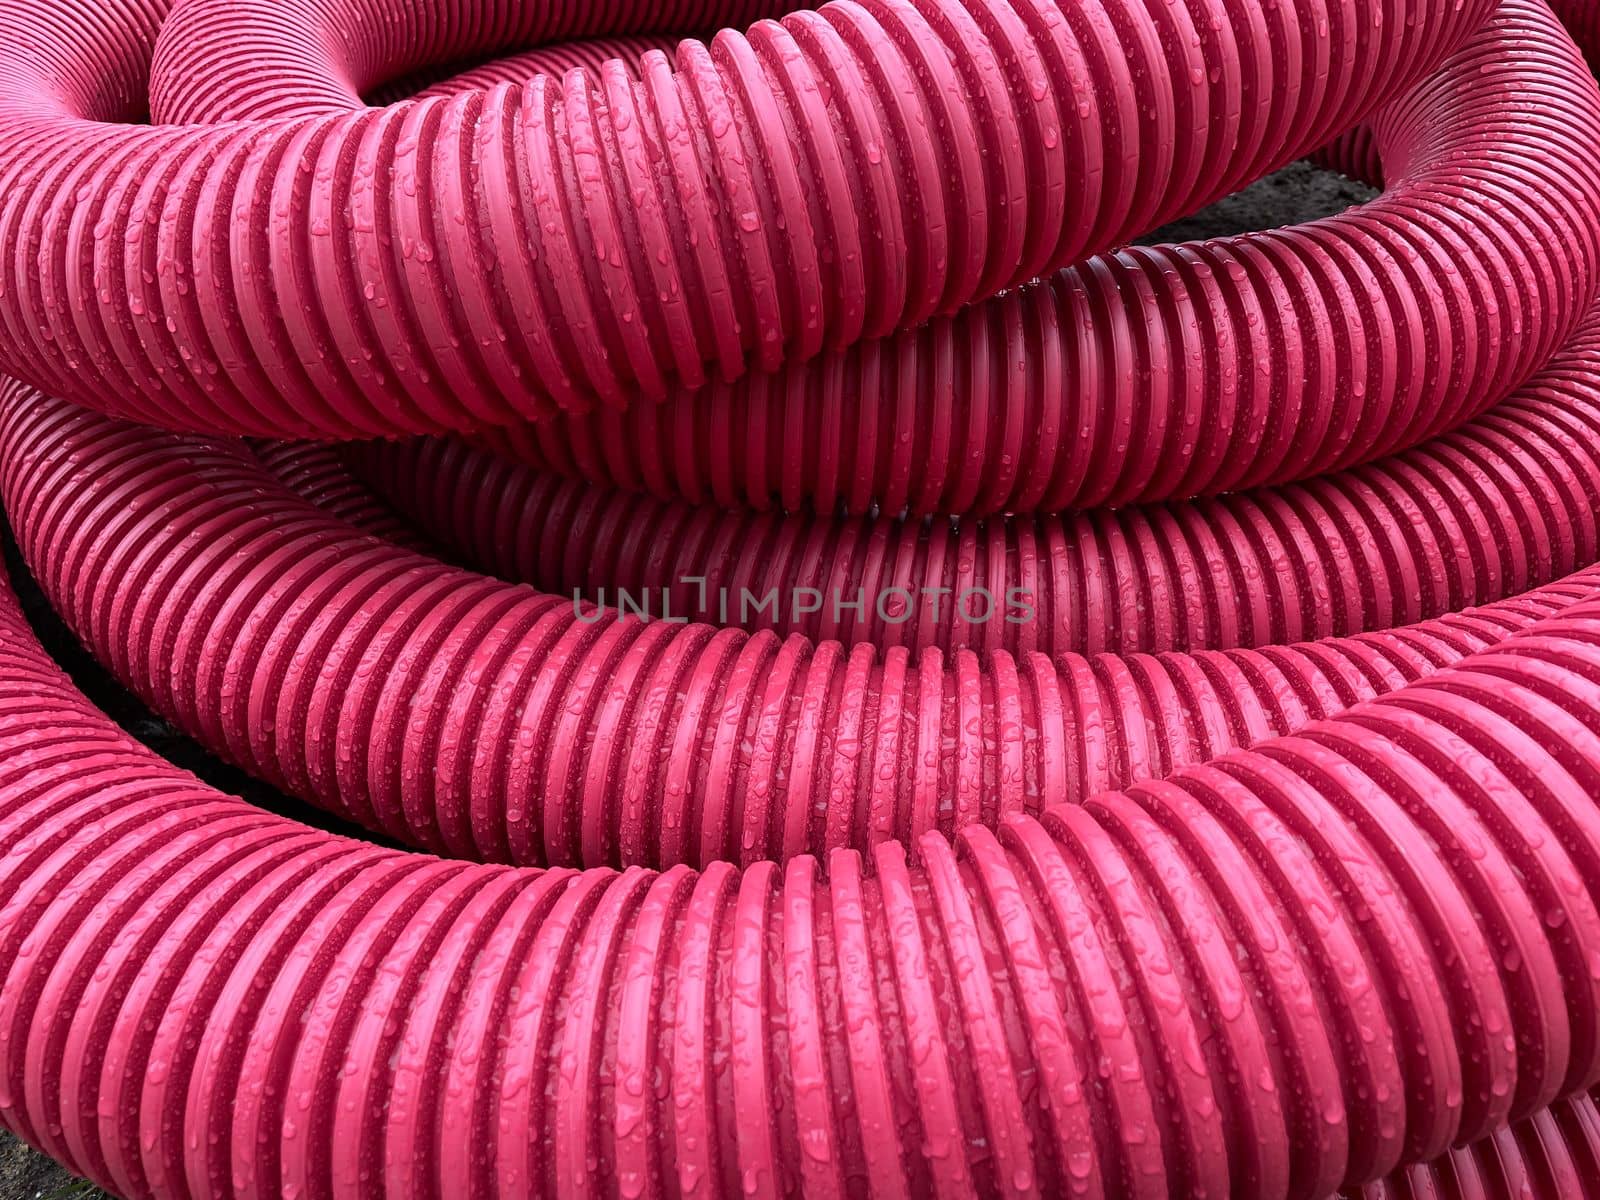 pile of plastic pipes wet from the rain, corrugated burgundy pipes, magenta abstract texture background, color of the year, High quality photo